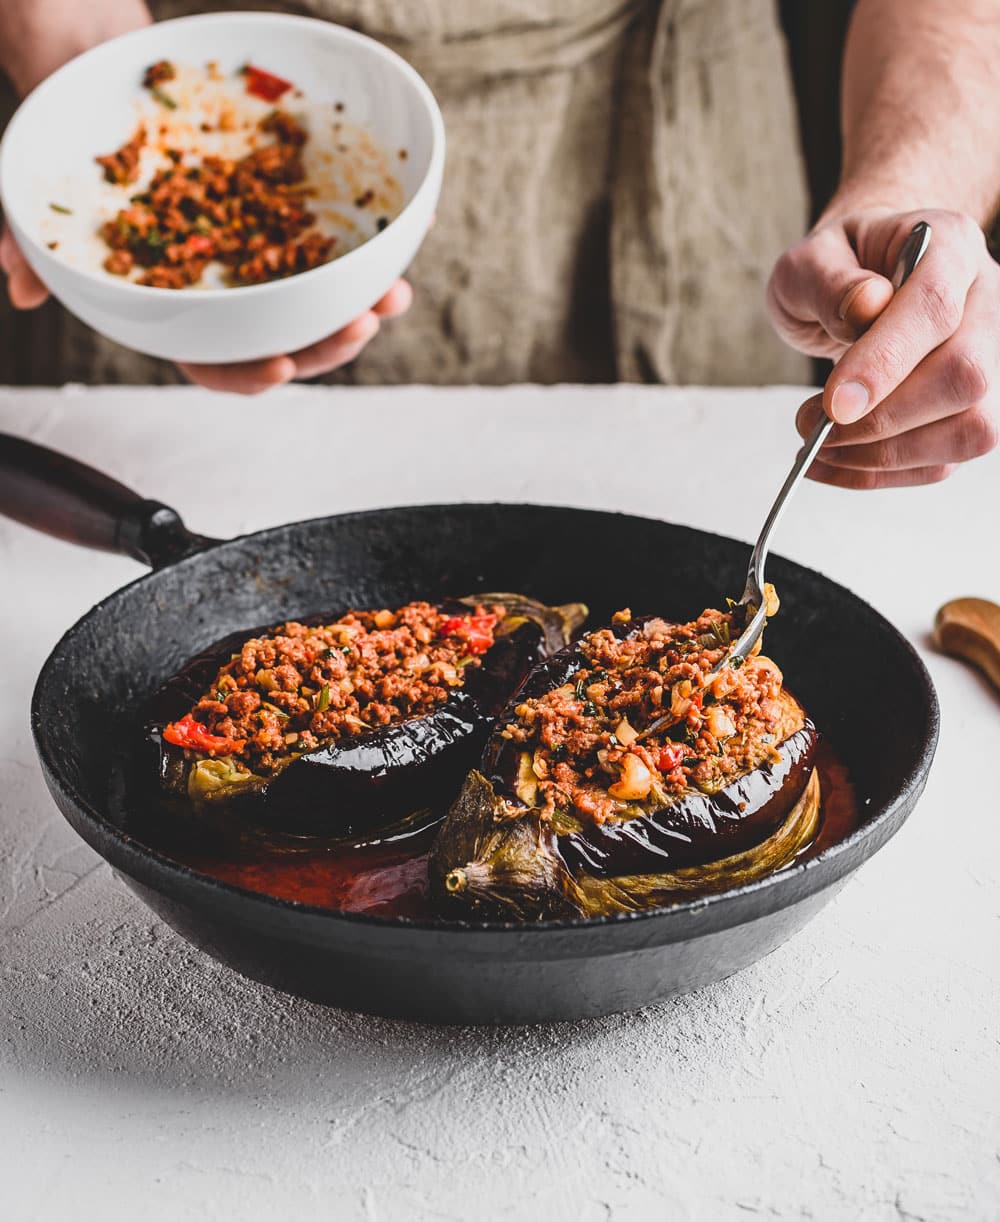 Spiced beef and tomato stuffed aubergine